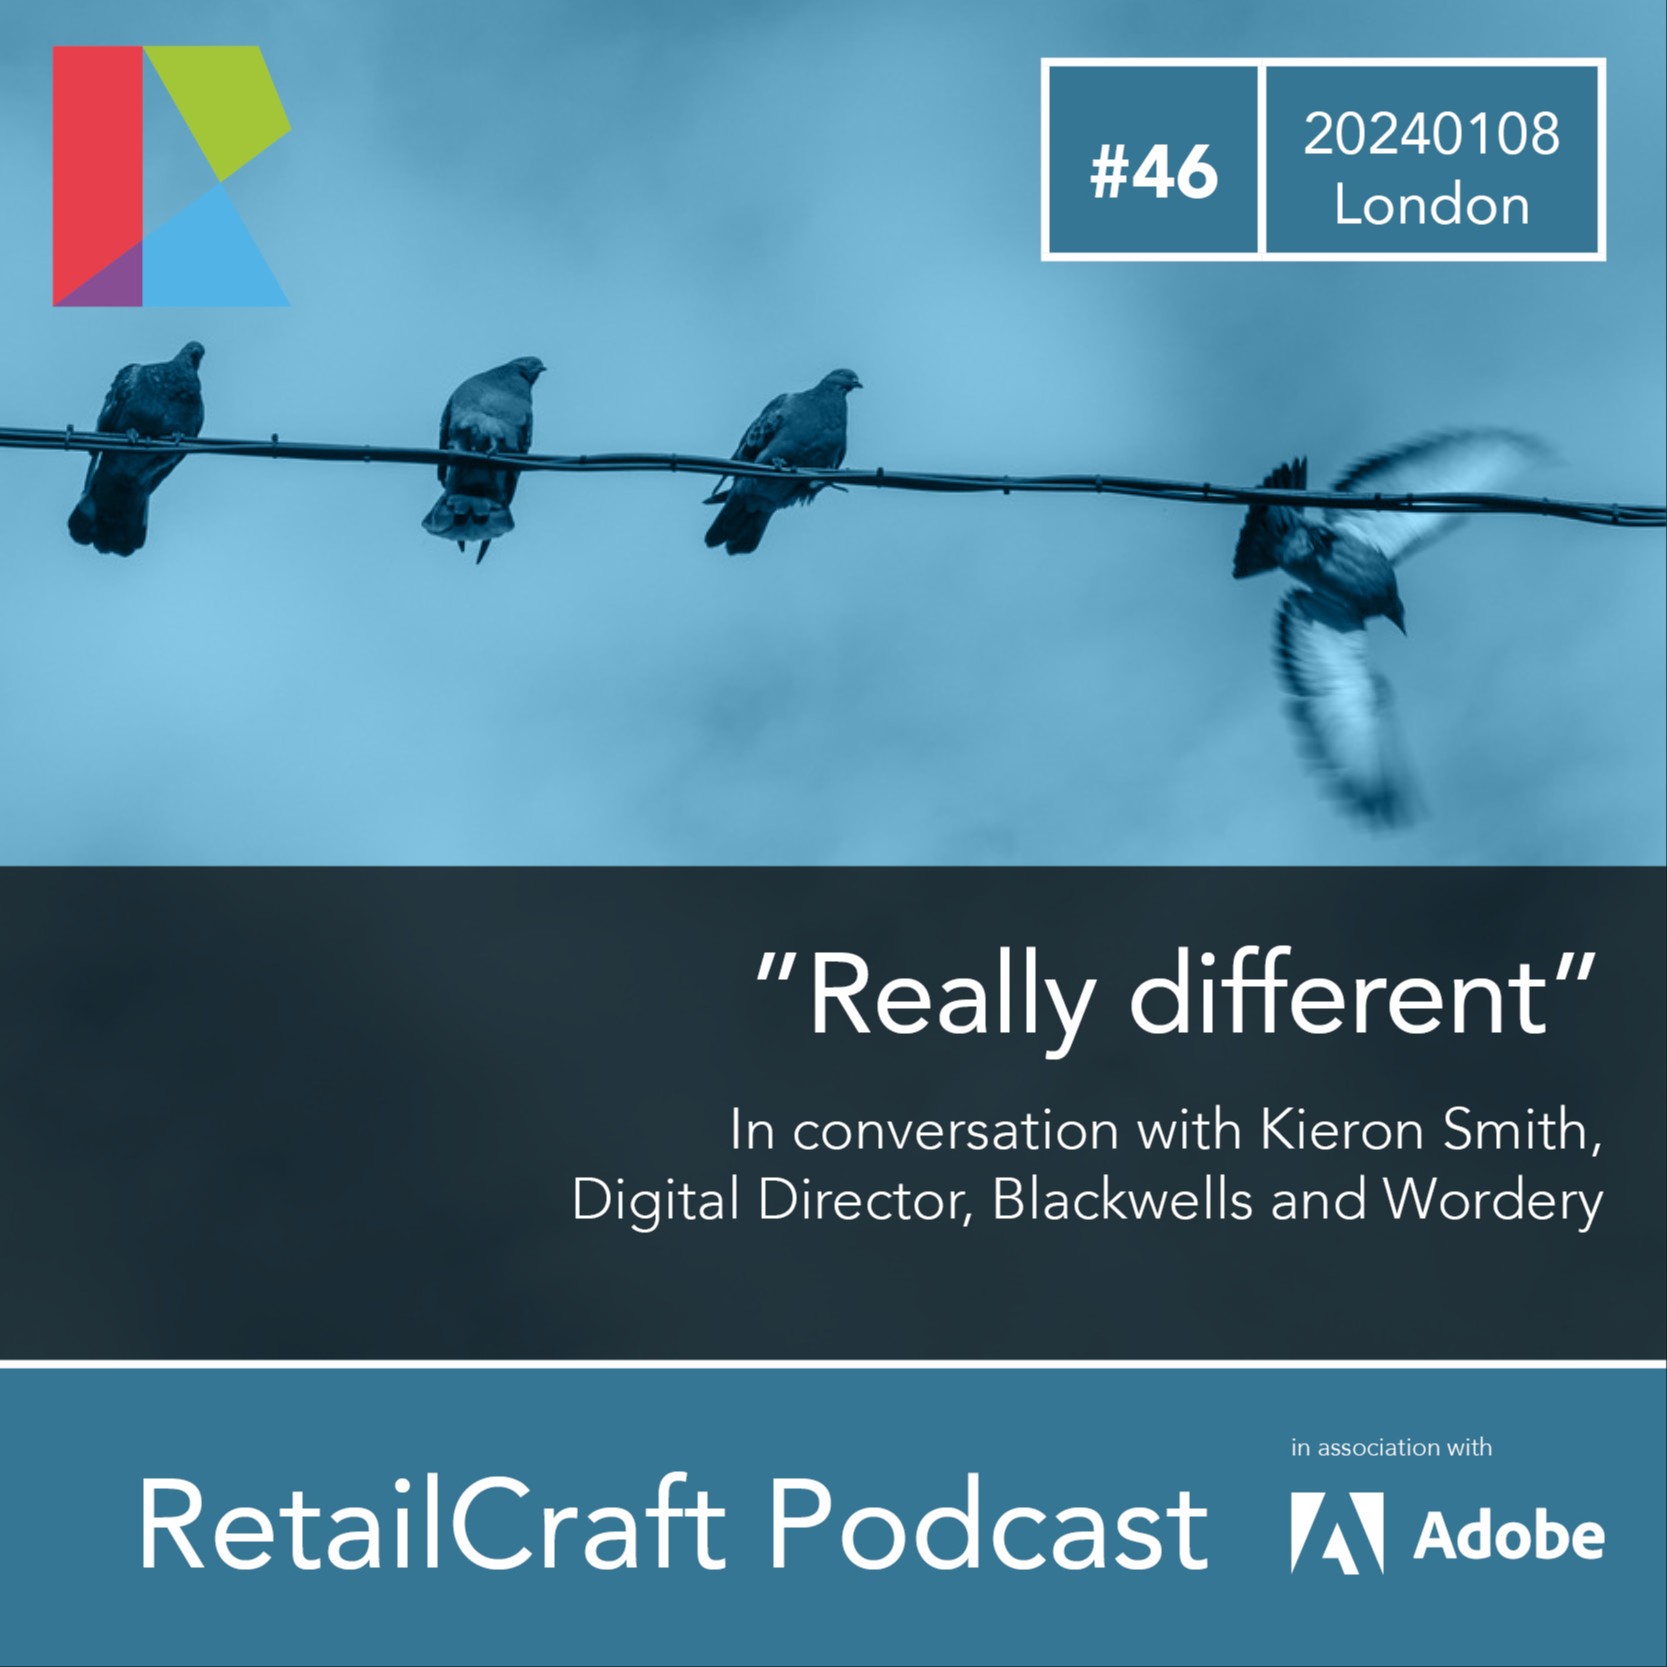 RetailCraft 46 - ”Really Different” - in conversation Kieron Smith, Digital Director of Blackwells, Waterstone and Wordery)